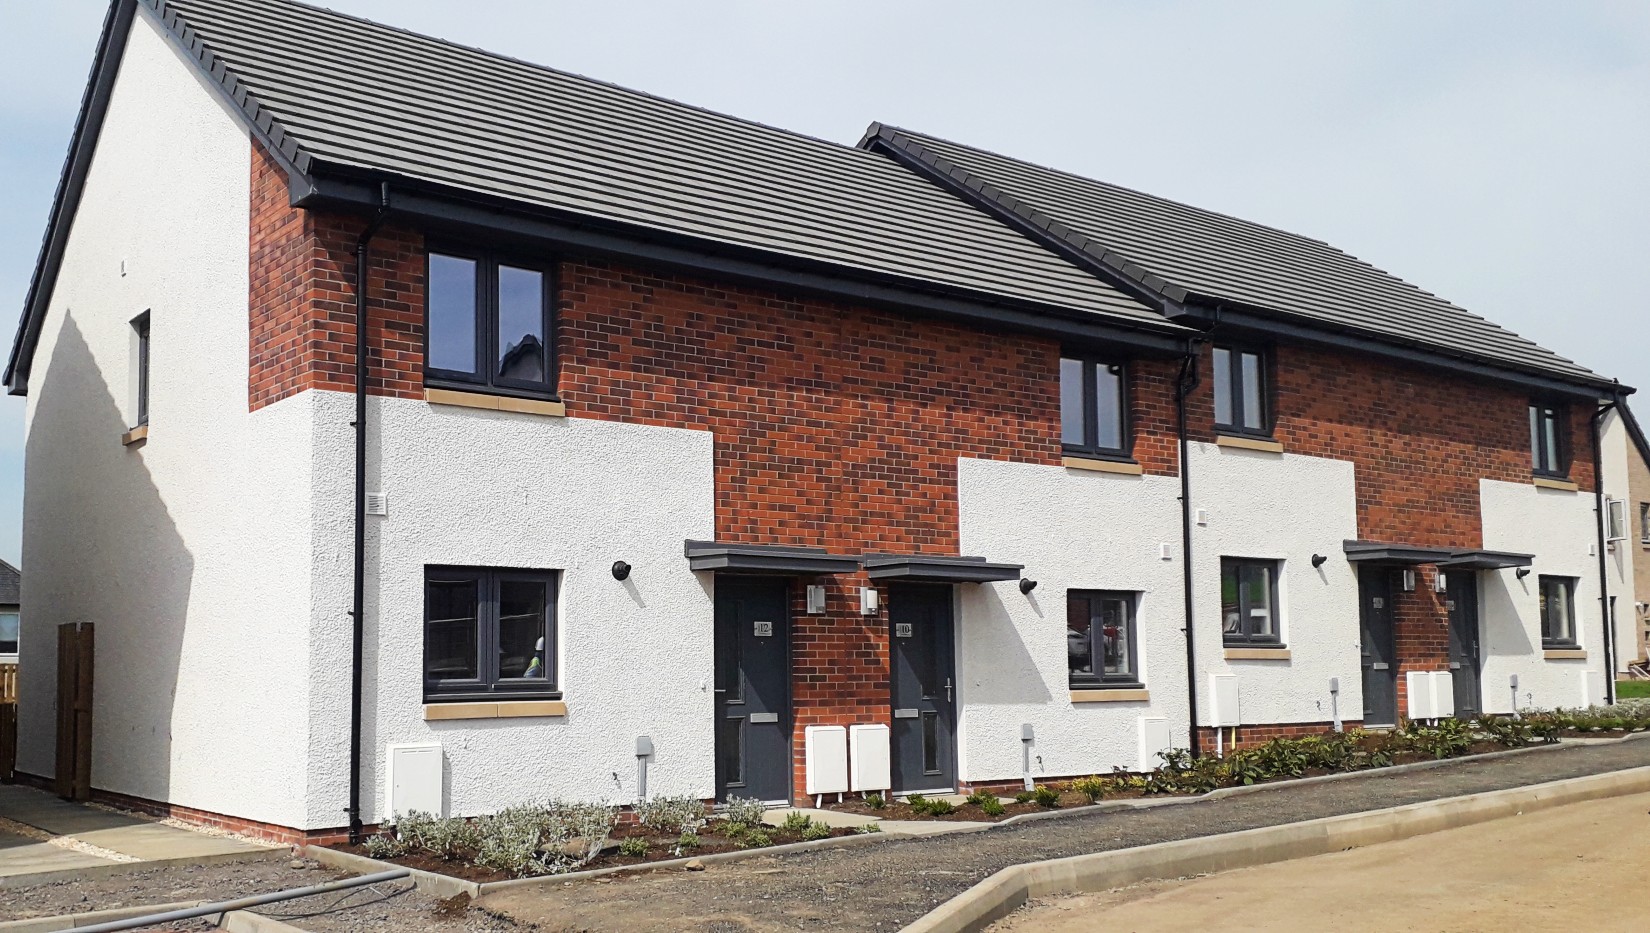 Kingdom Housing Association welcomes tenants to Dunipace